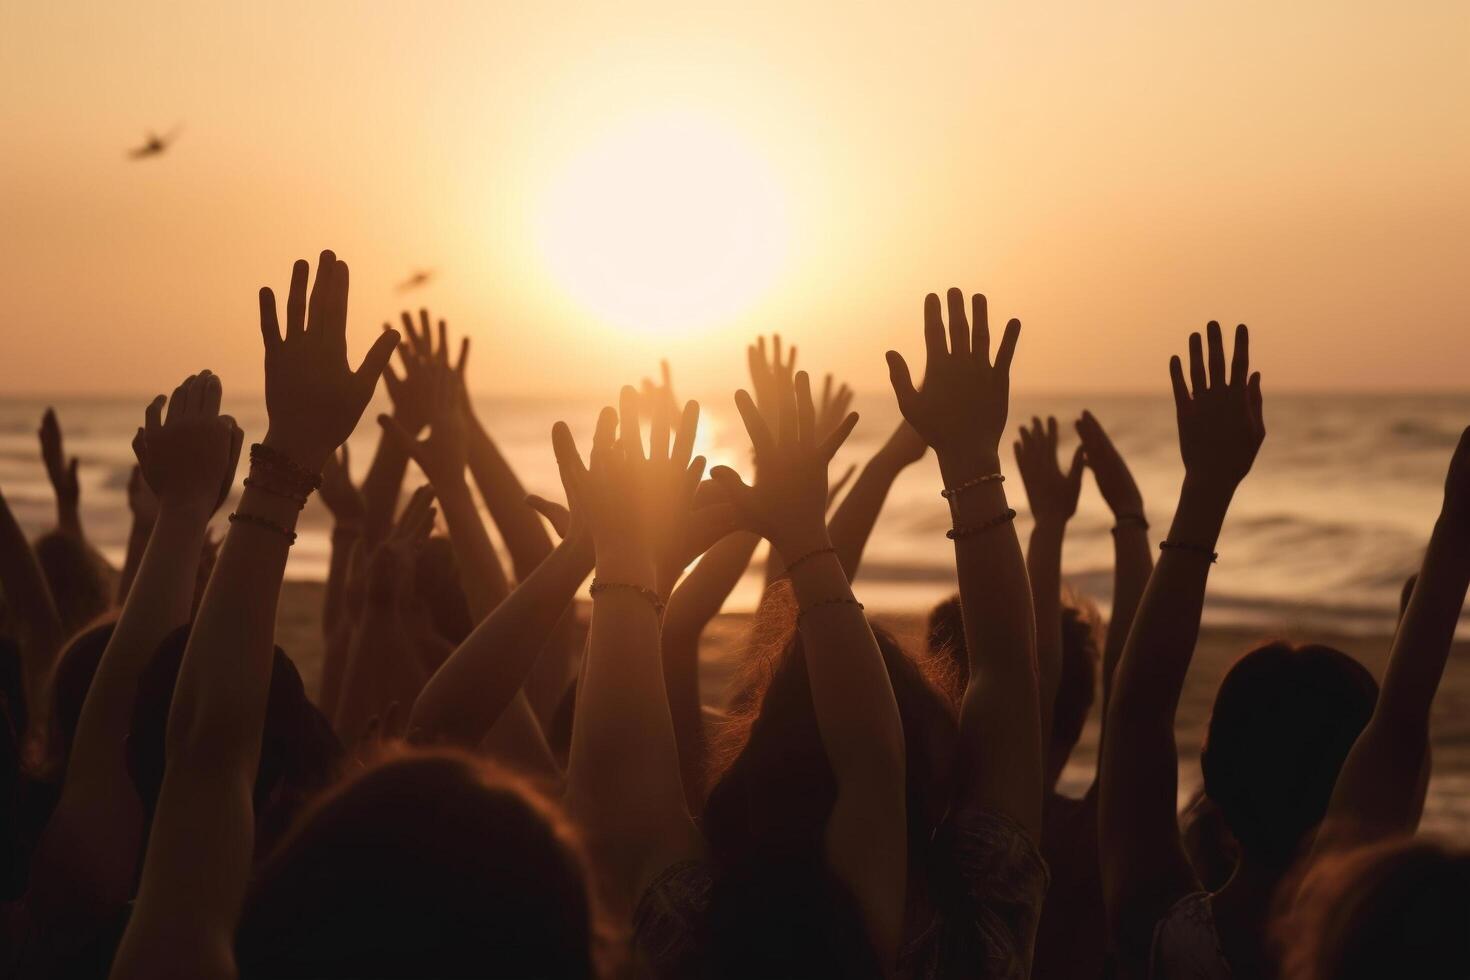 Cheering crowd with hands in the air, summer vacation image, Bokeh People have fun at sunset on a beach, photo